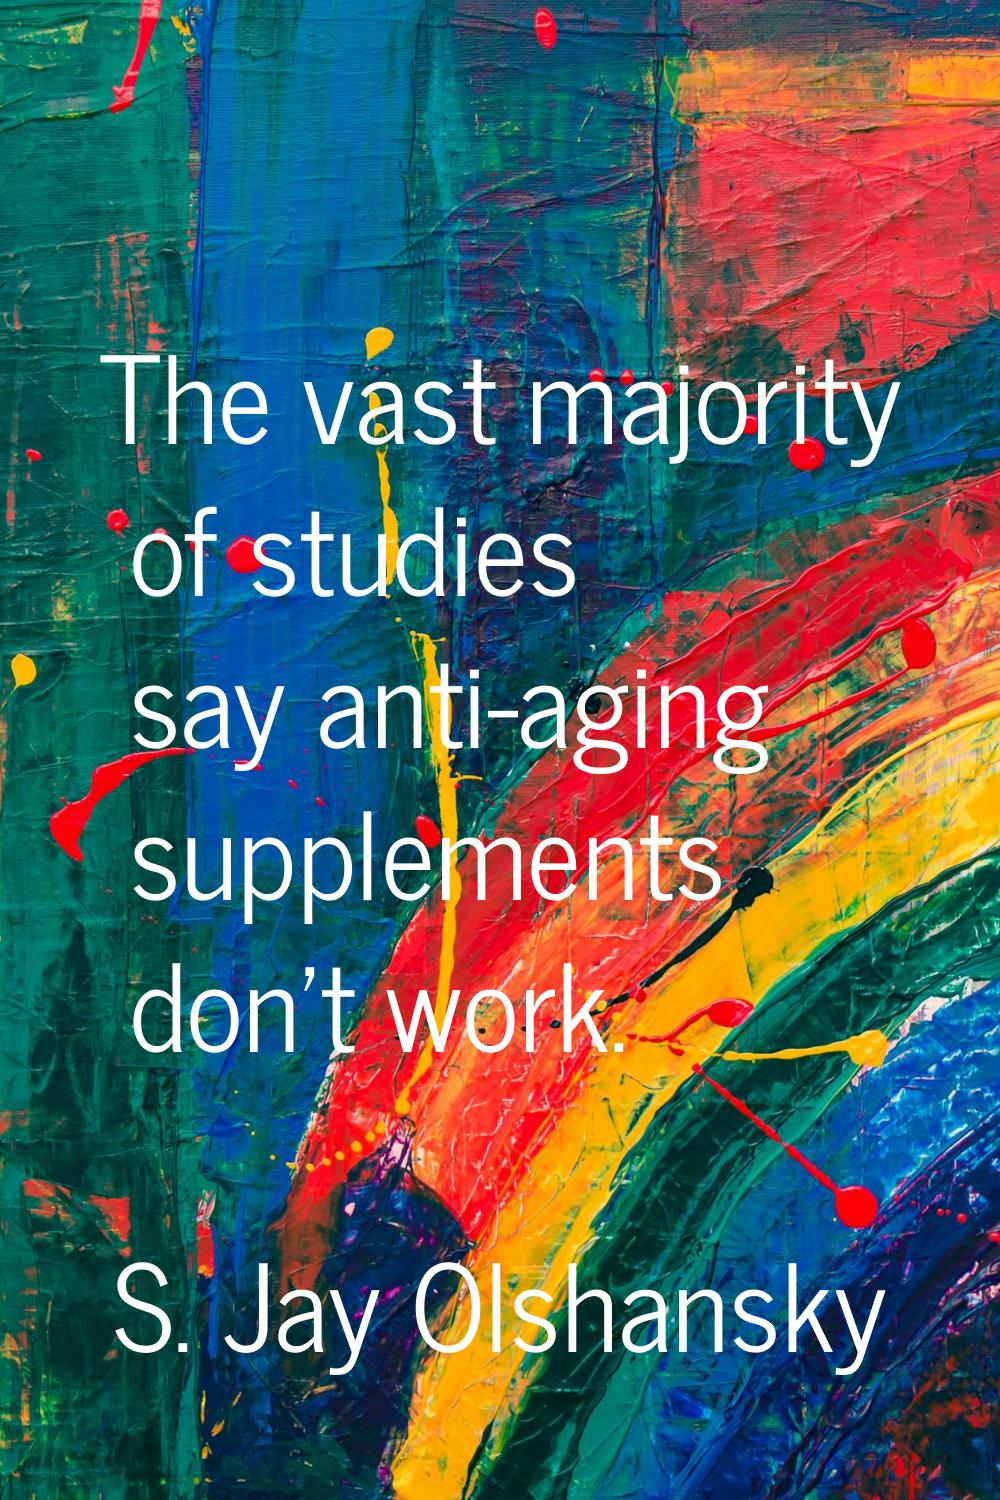 The vast majority of studies say anti-aging supplements don't work.